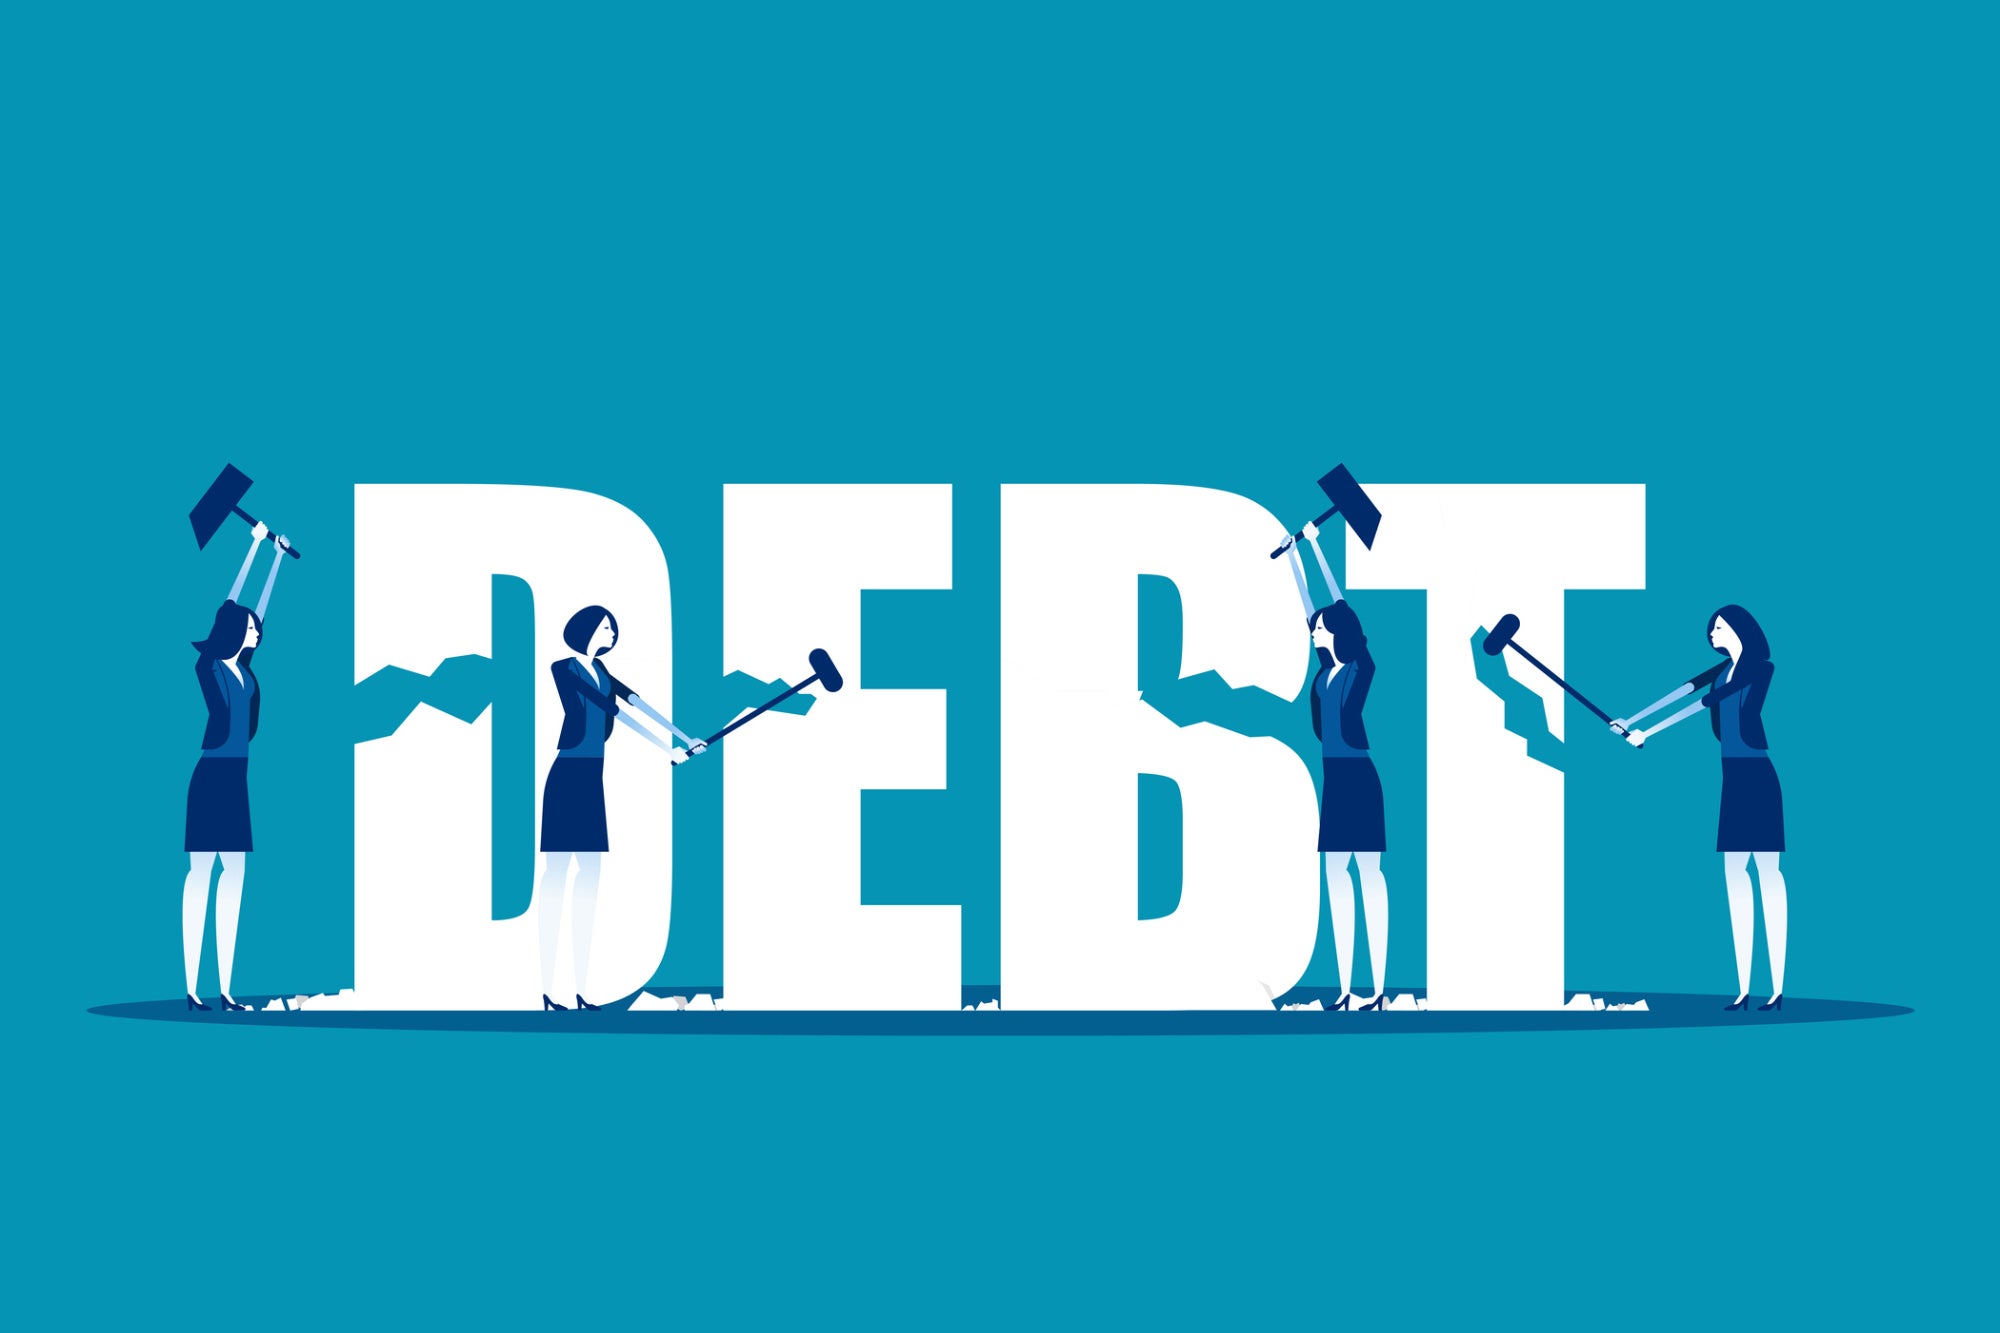 7 Steps to Reduce Business Debt in 90 Days